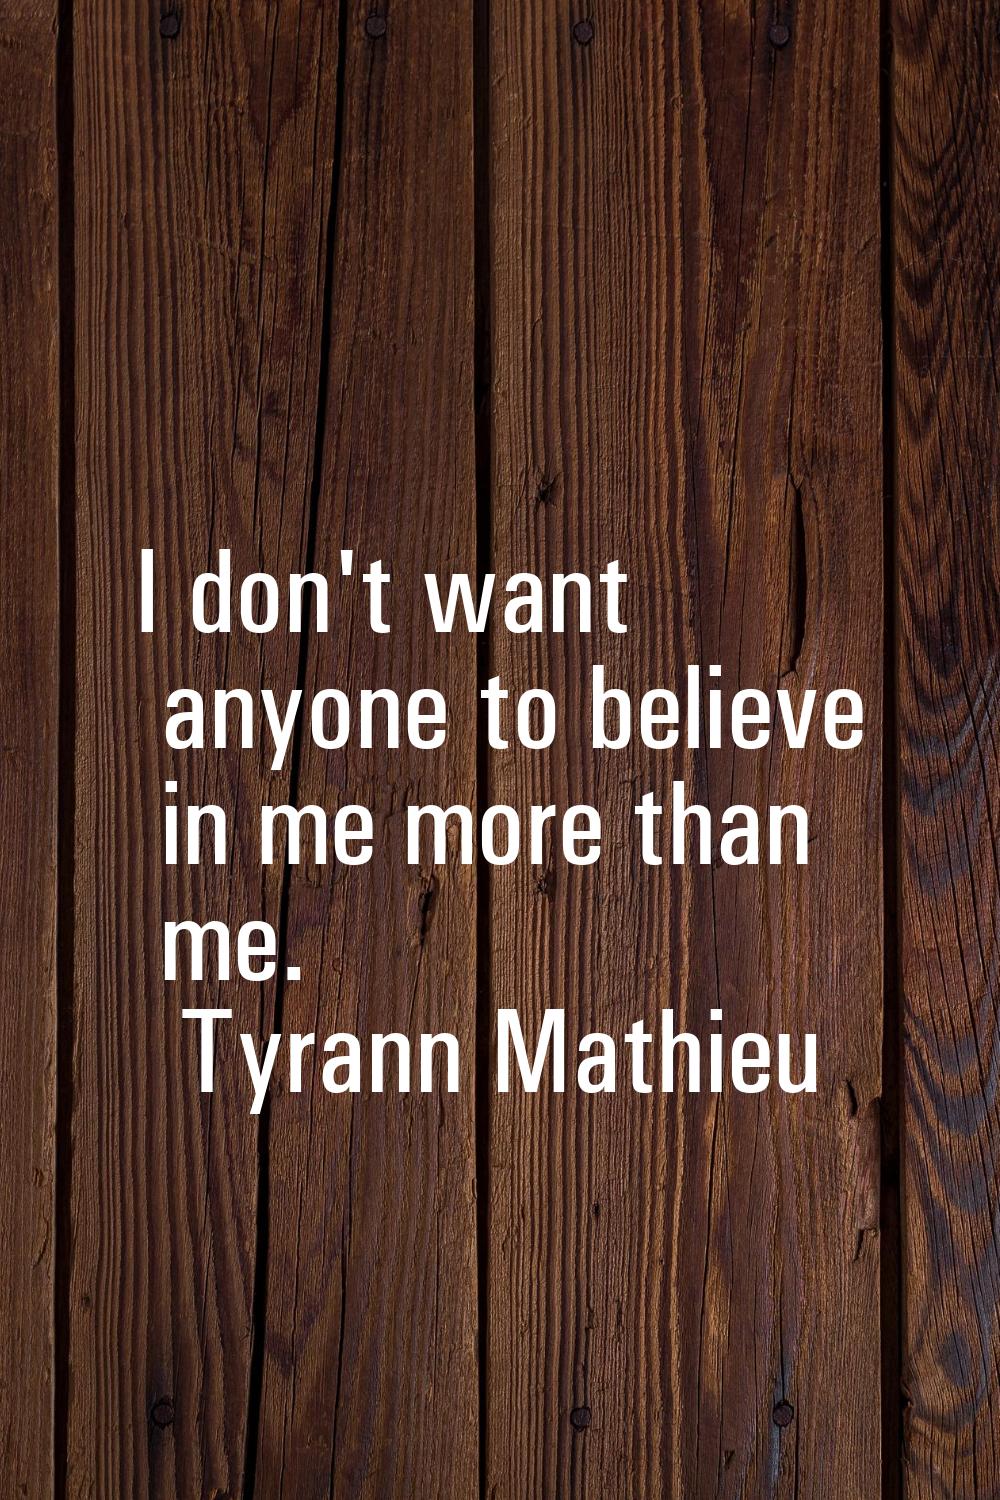 I don't want anyone to believe in me more than me.